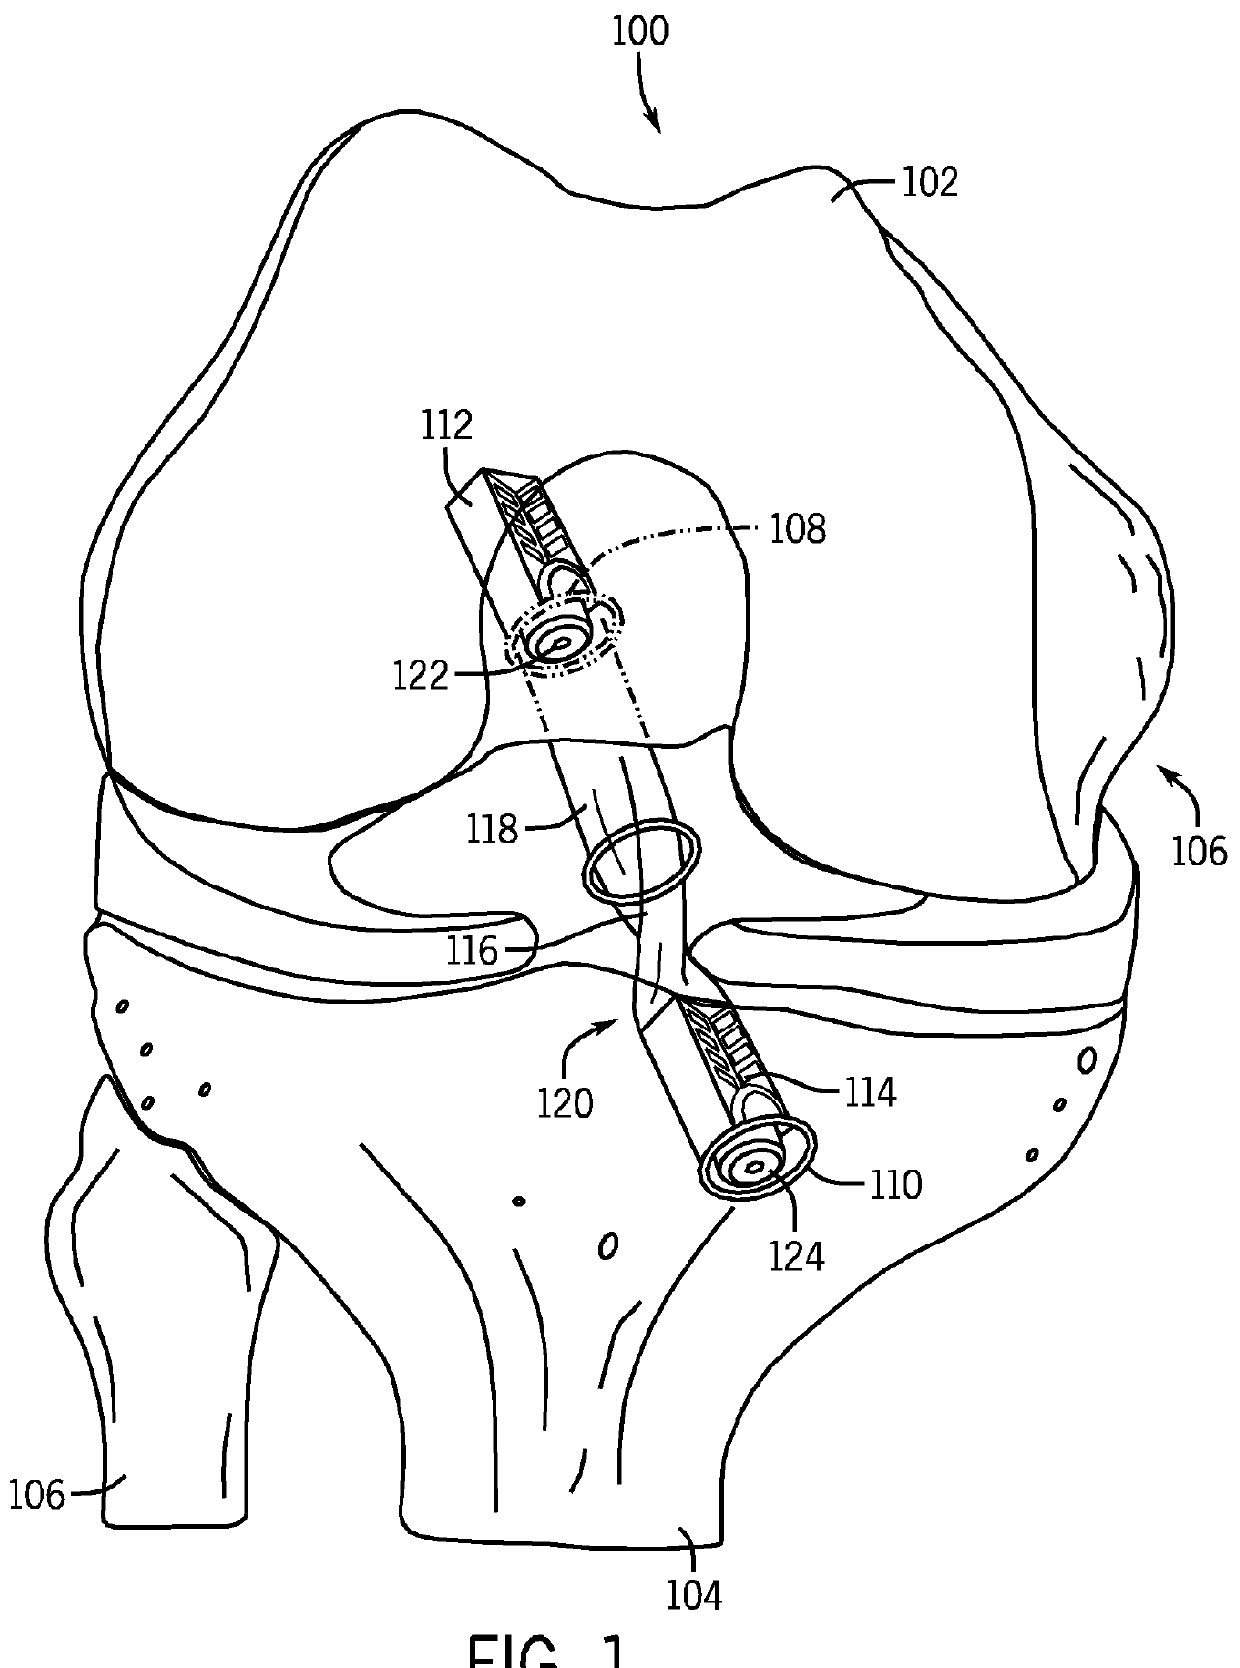 System and Method for Ligament Reconstruction